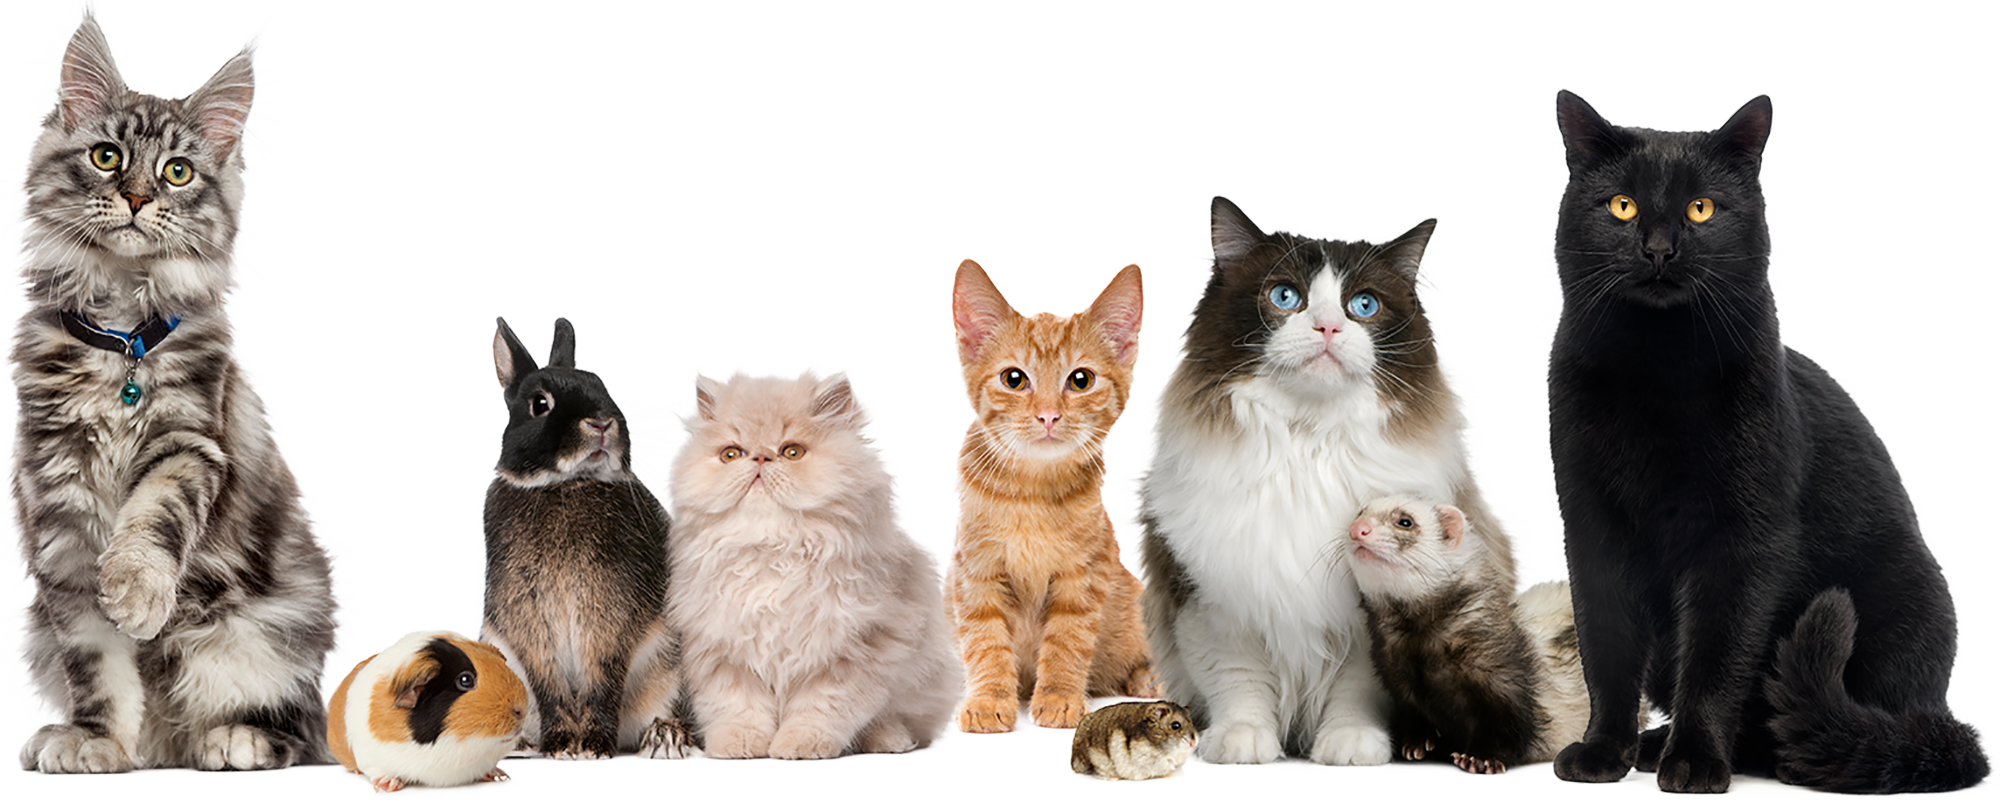 Whiskers Pet Sitting Services cats